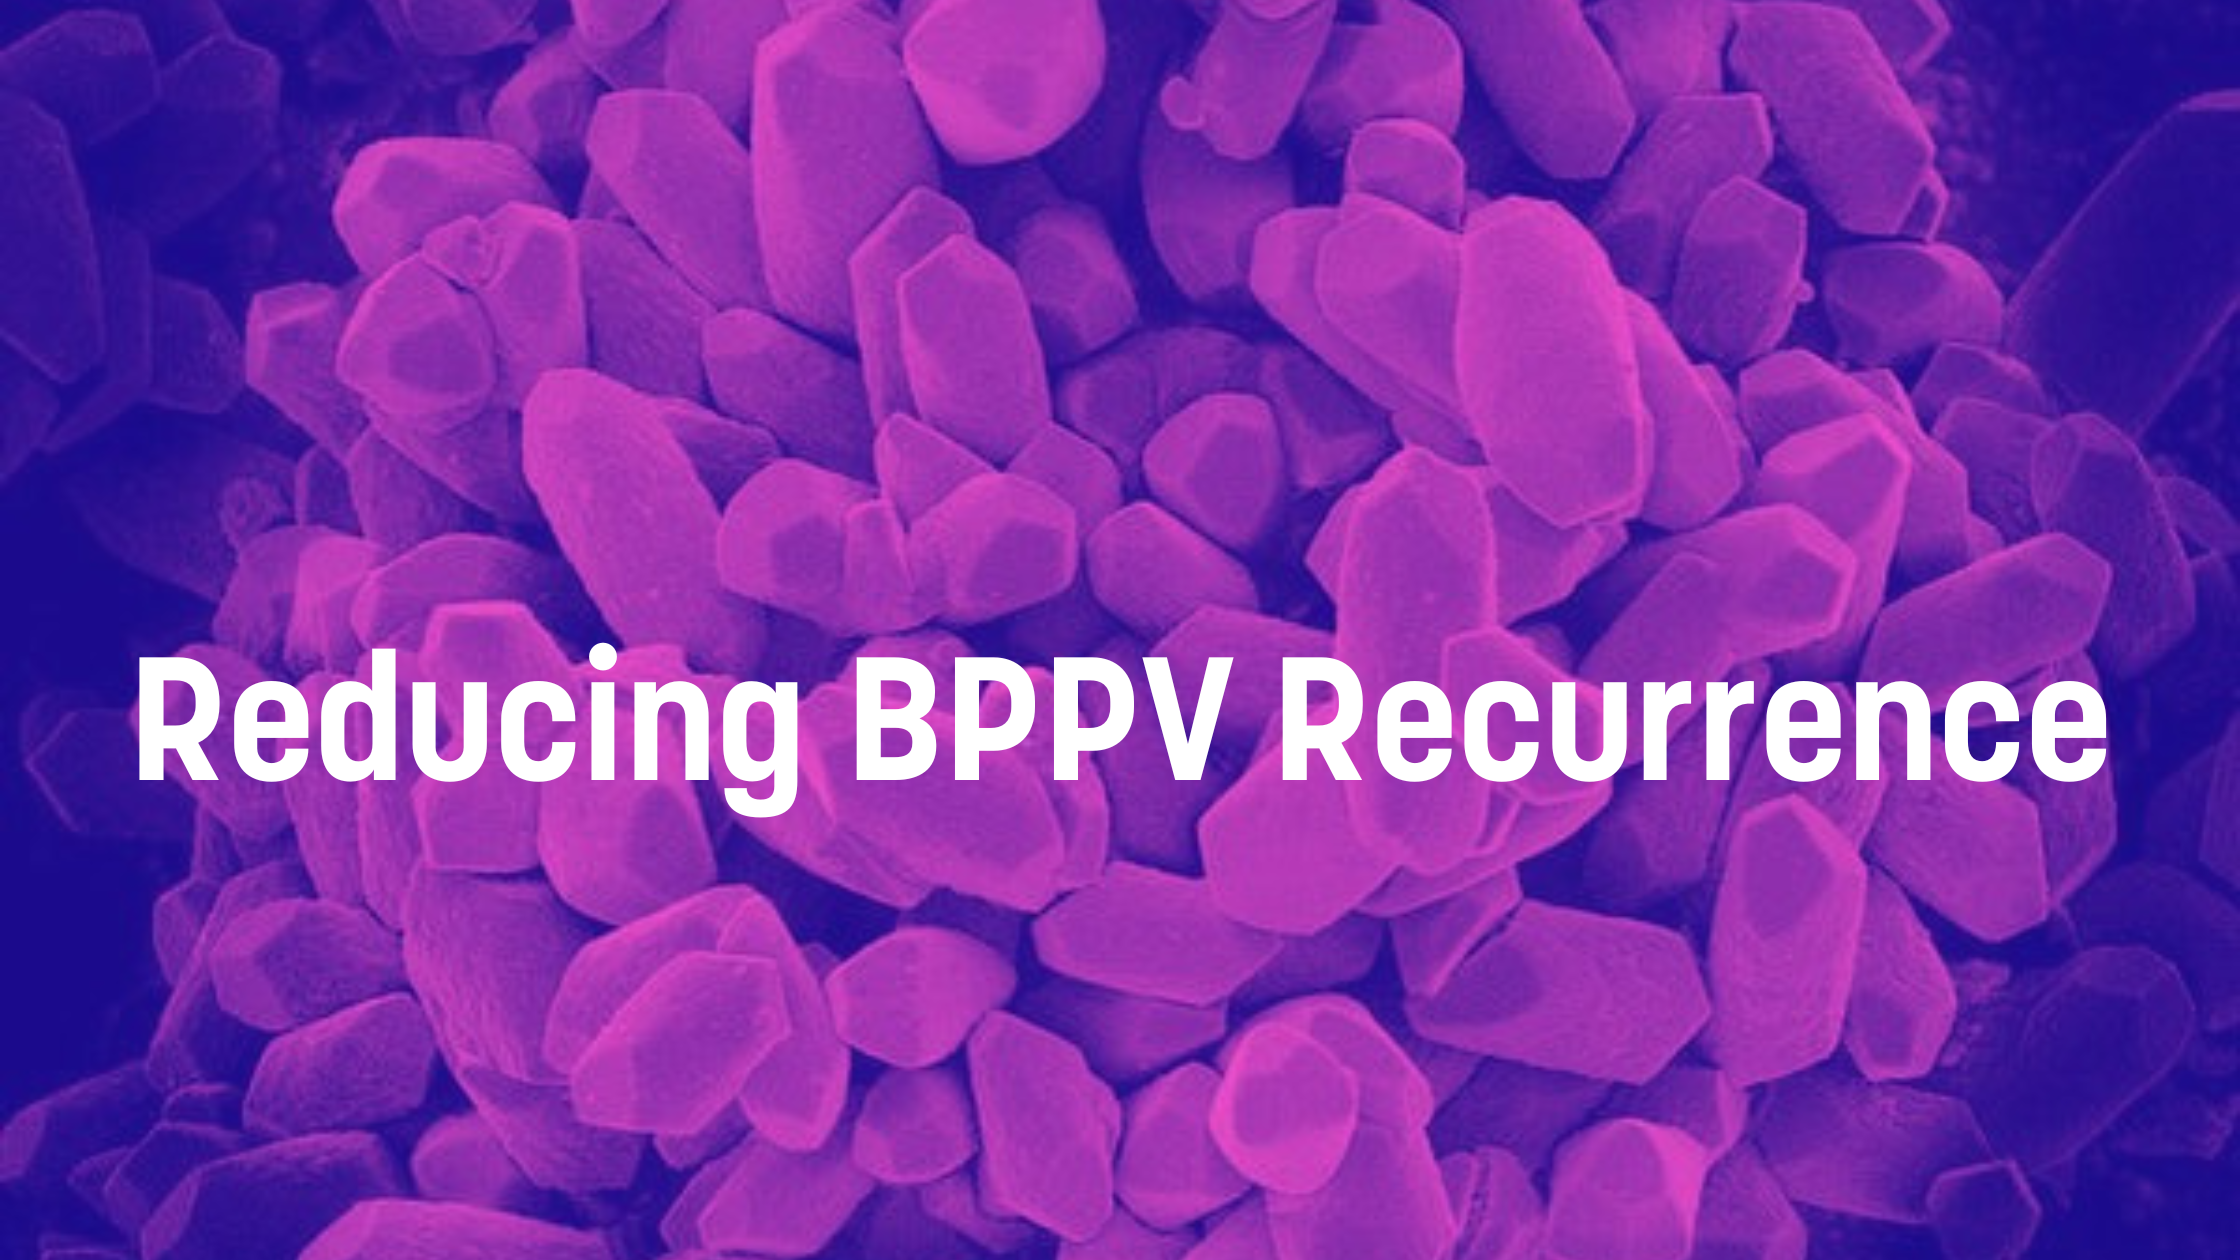 Reducing BPPV Recurrence